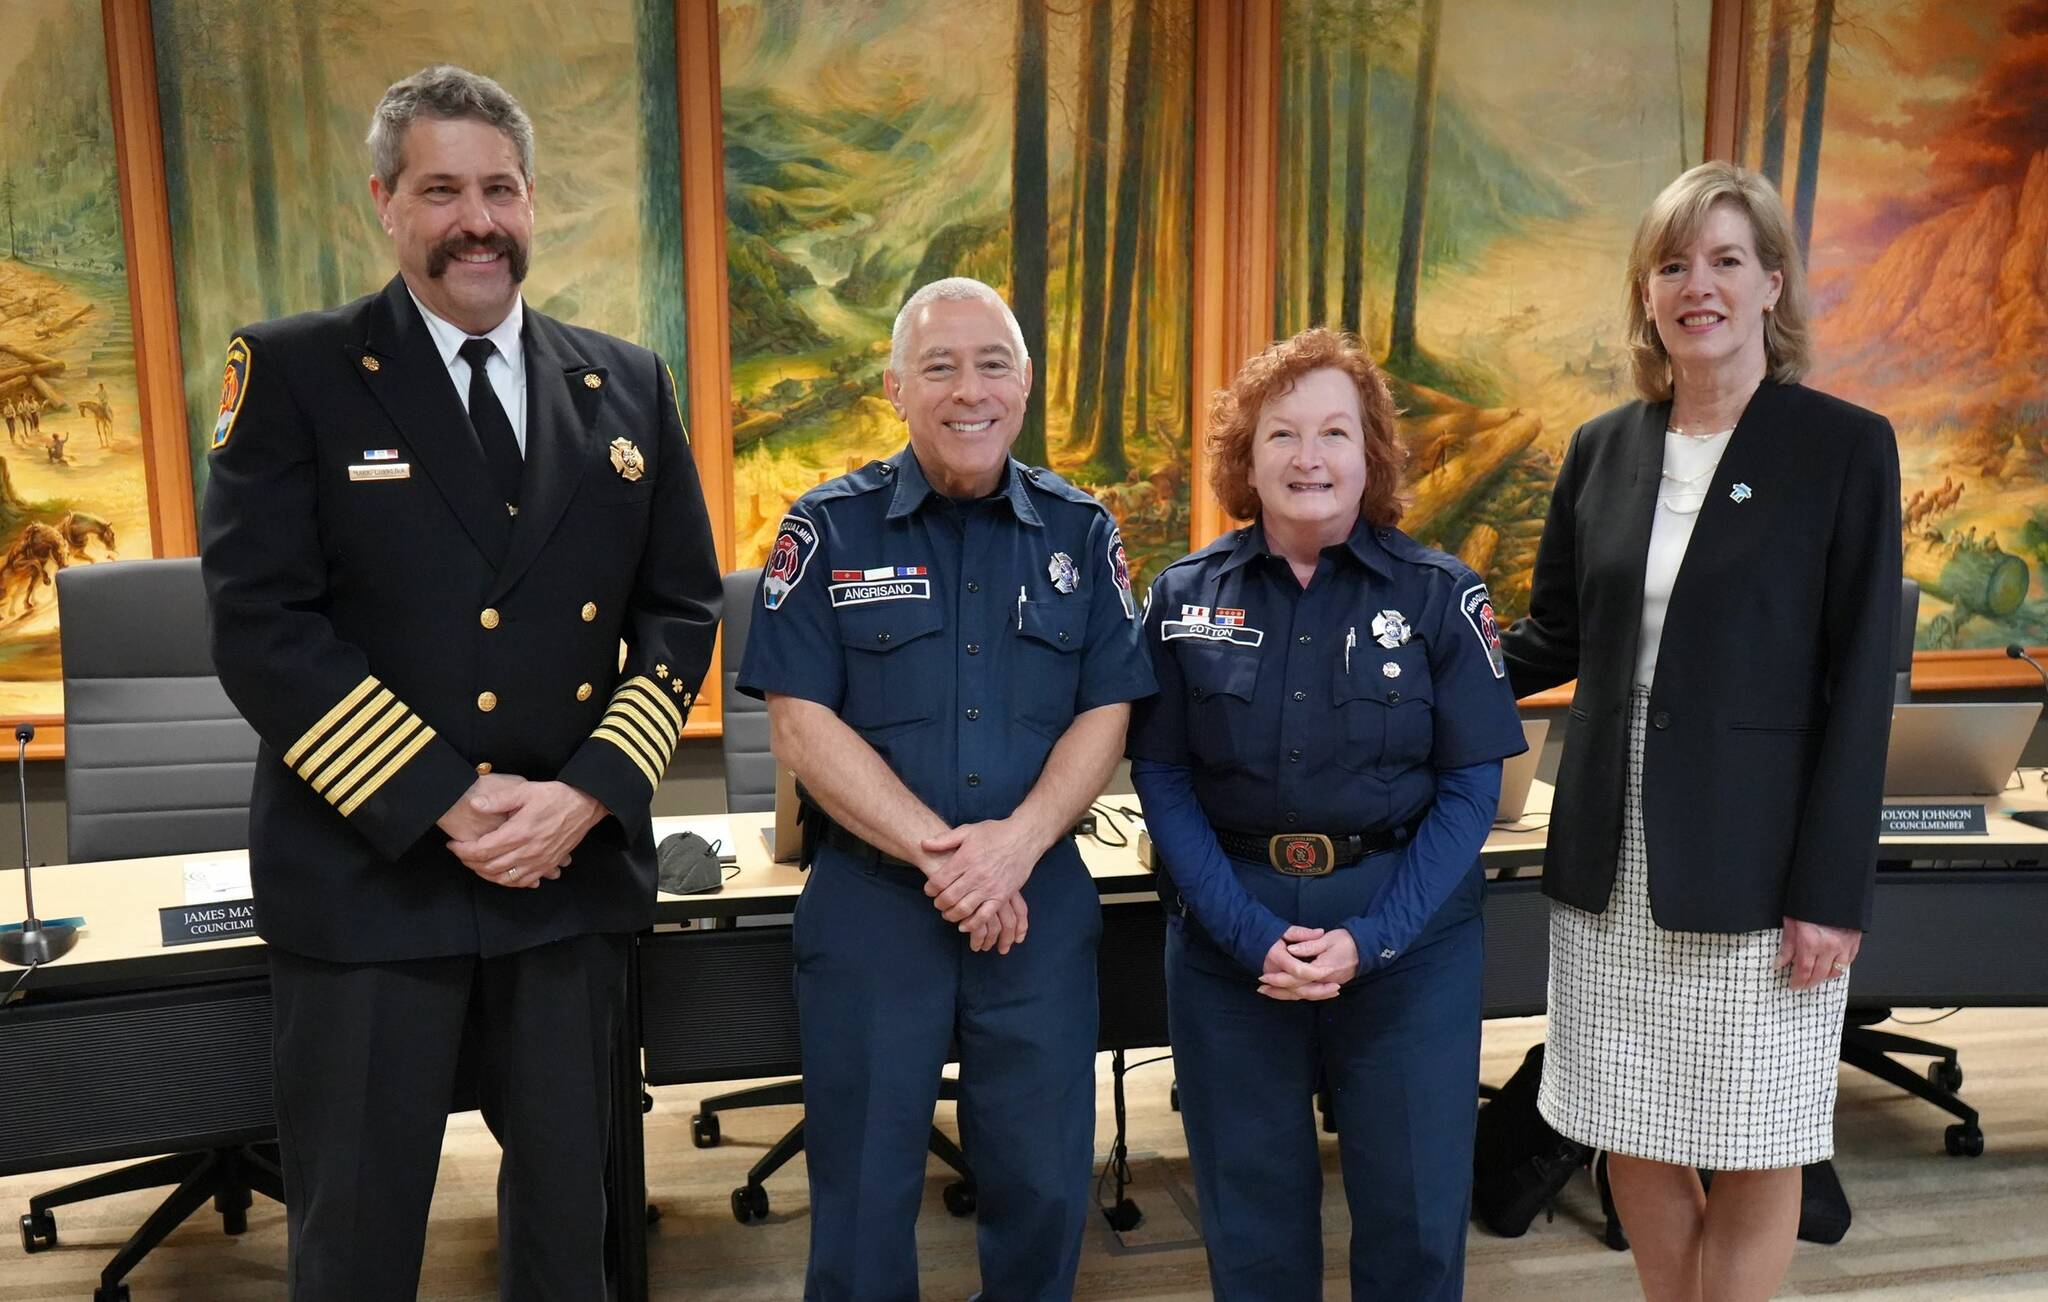 Catherine Cotton, center right, poses for a photo after learning about her lifetime achievement award. From left: Fire Chief Mark Correira, Robert Angrisano, Cotton and Snoqualmie Mayor Katherine Ross. Courtesy of the City of Snoqualmie.